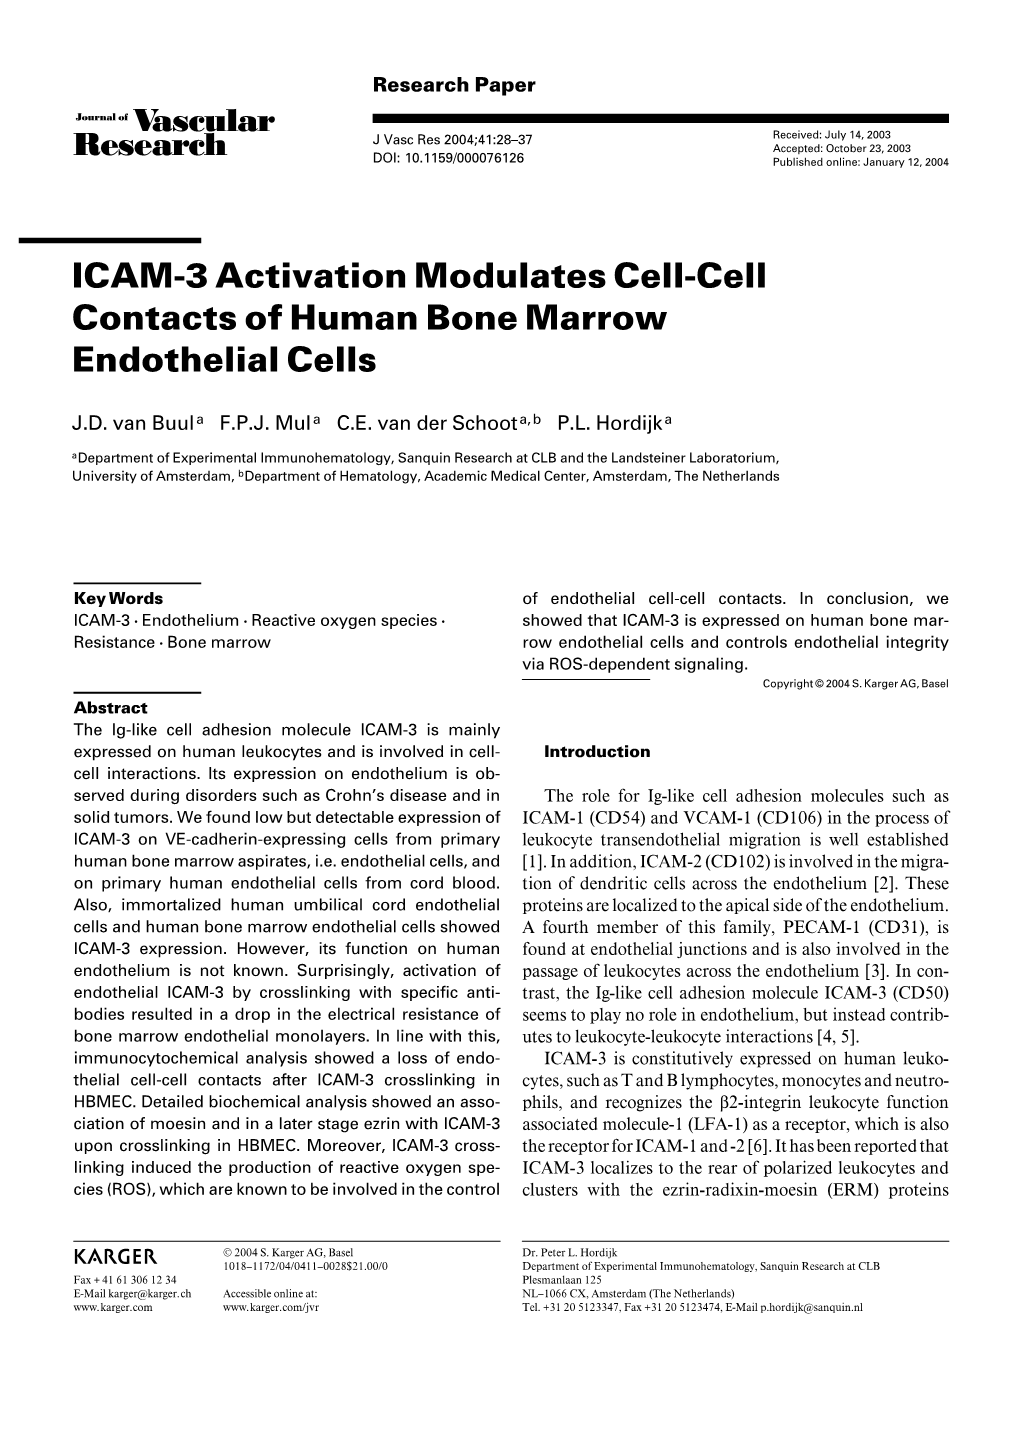 ICAM-3 Activation Modulates Cell-Cell Contacts of Human Bone Marrow Endothelial Cells